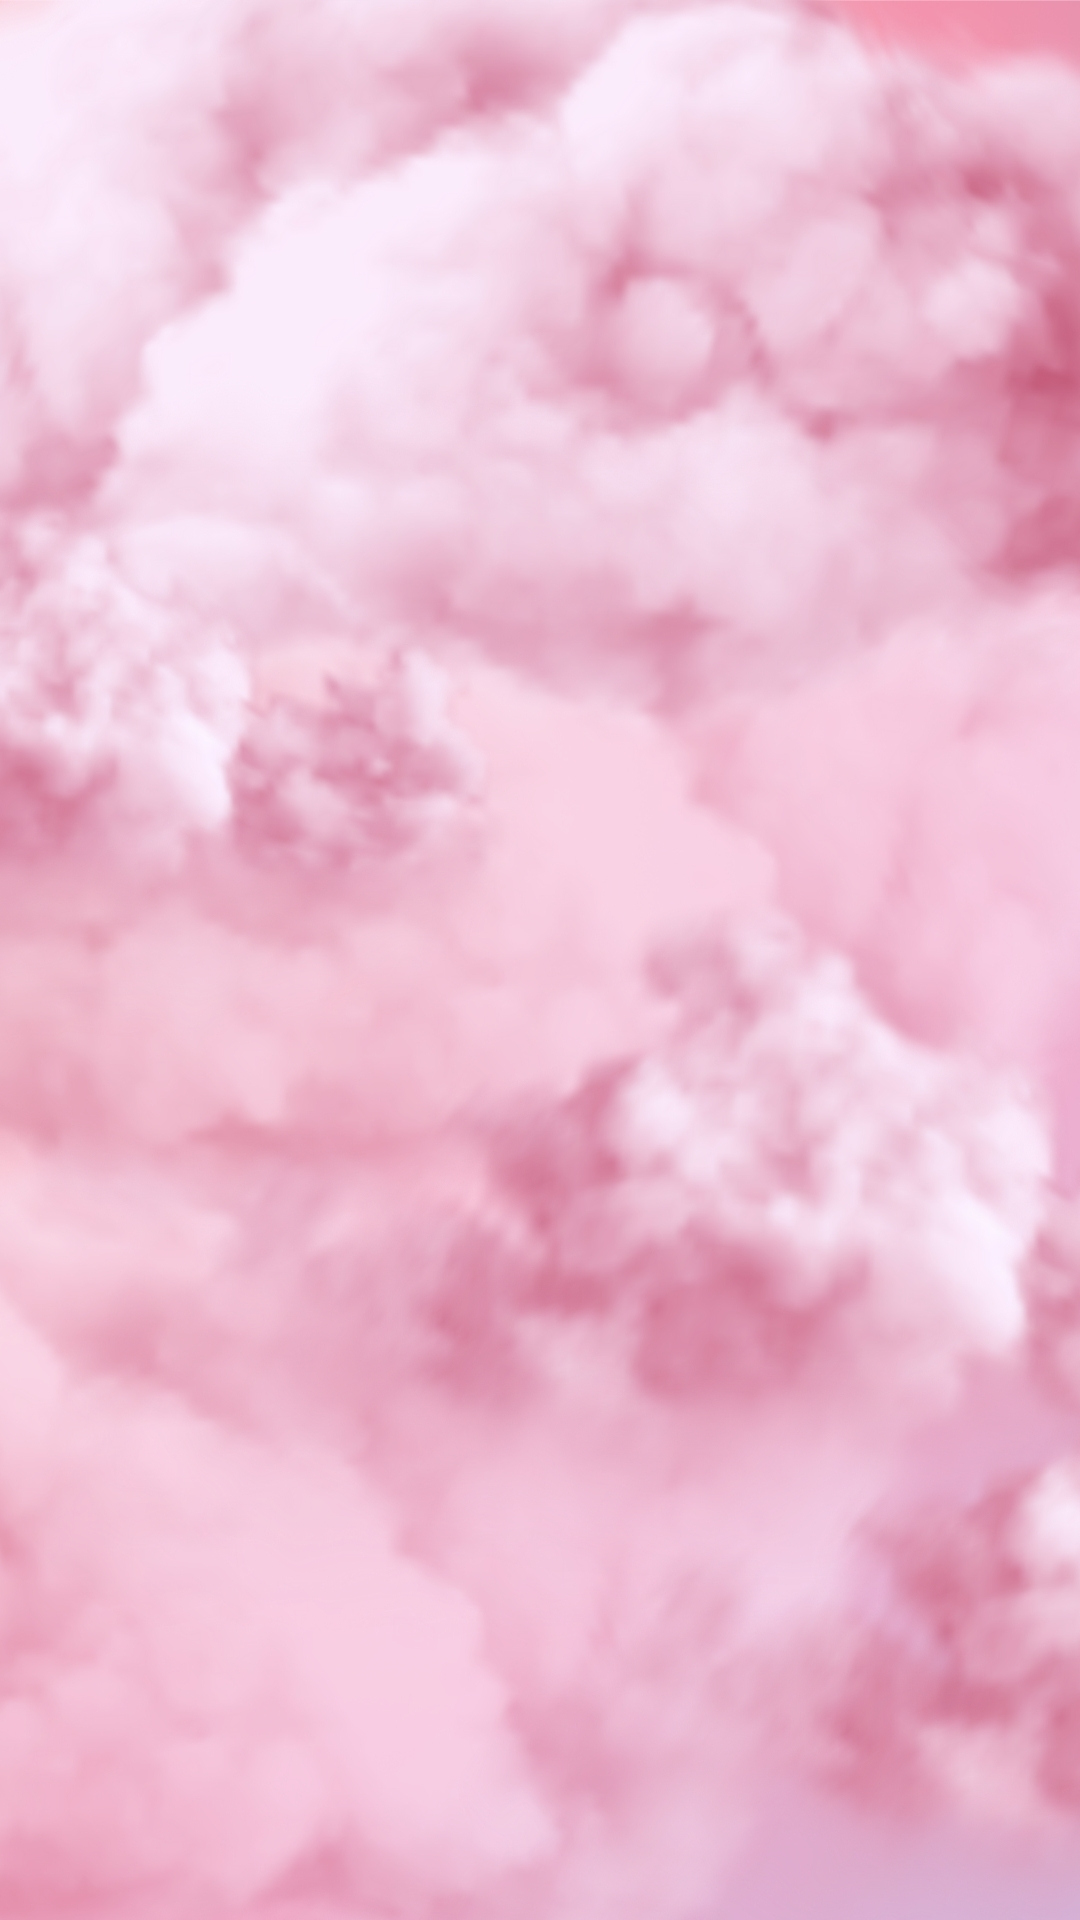 33+ FREE Pink Preppy Wallpapers For Your Phone With Instant Download